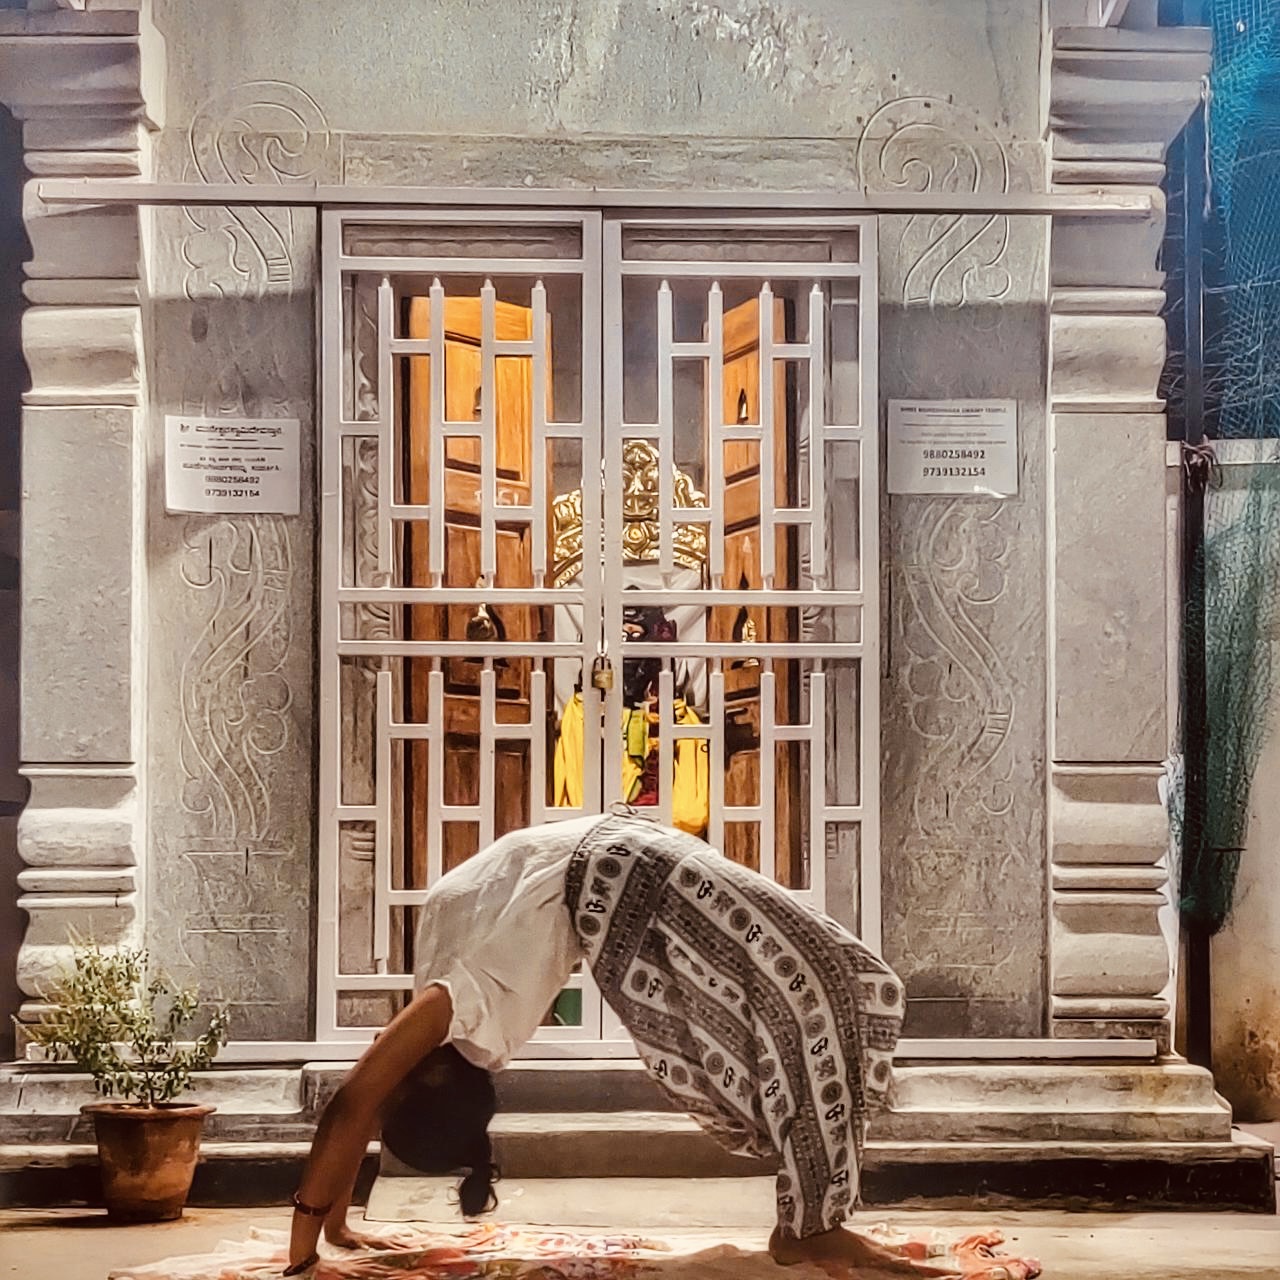 Swathi practicing the chakrasana in front of a mandir